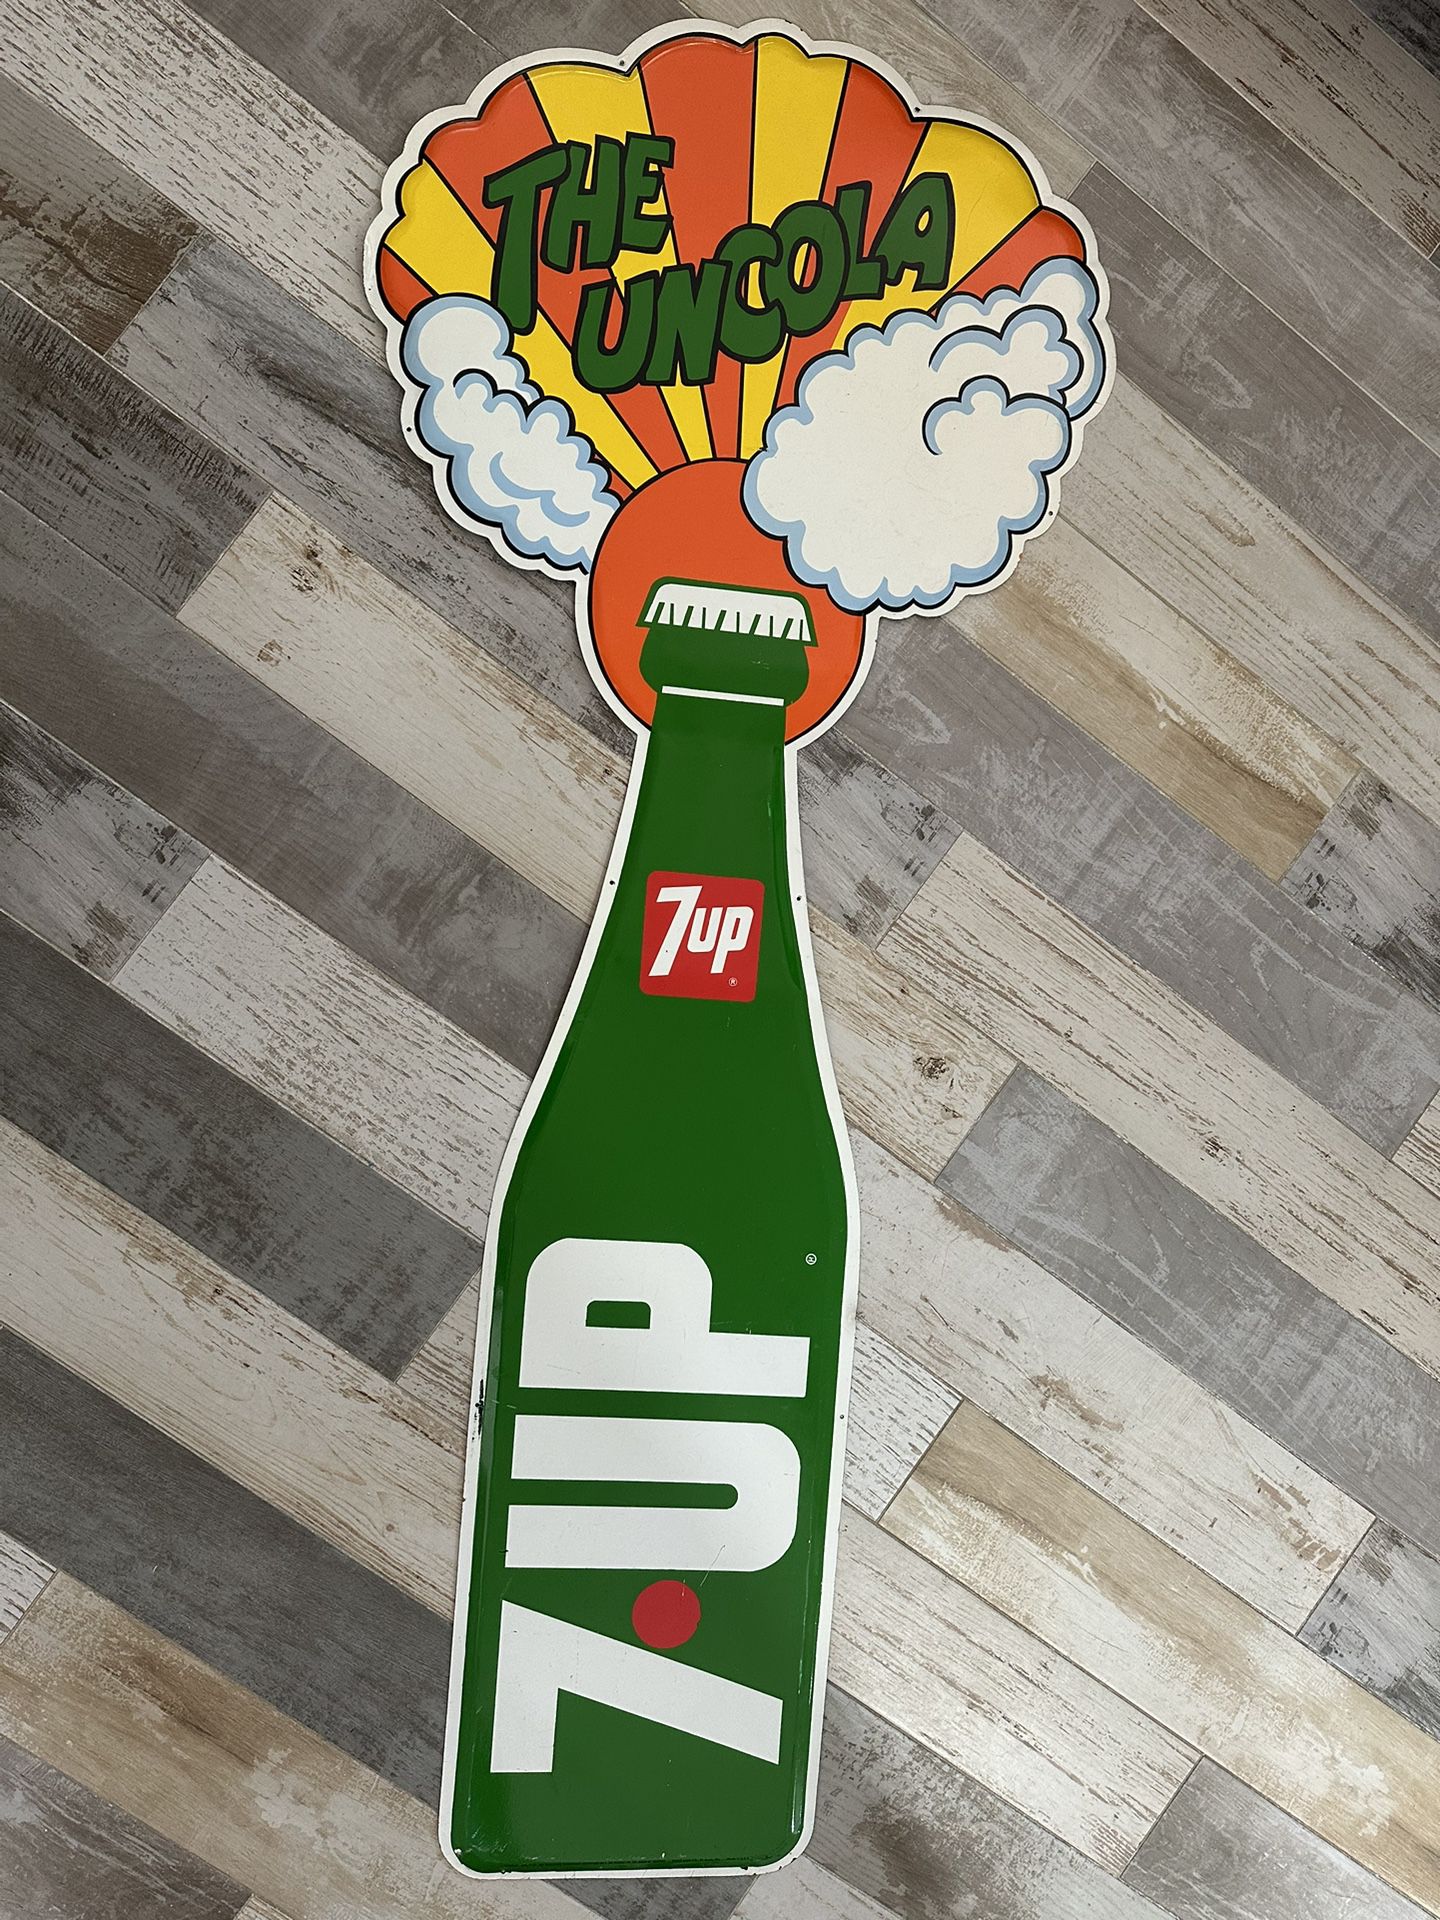 Vintage Metal Sign - 7UP THE UNCOLA BOTTLE DOUBLE SIDED TIN DIECUT VERTICAL METAL SIGN